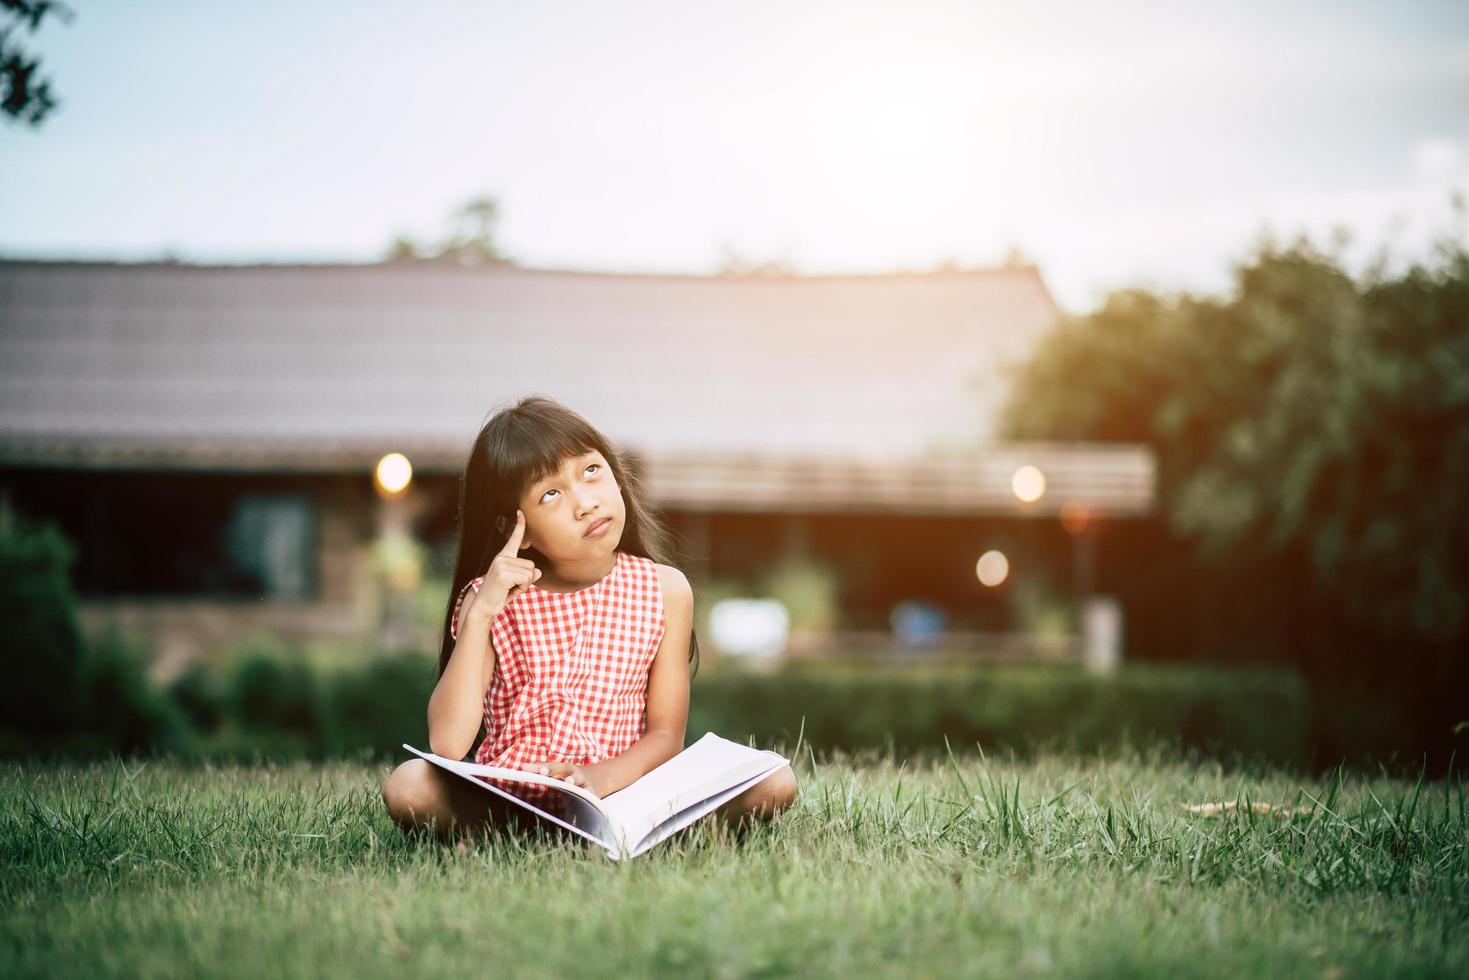 Little girl reading a book in her house garden outside photo